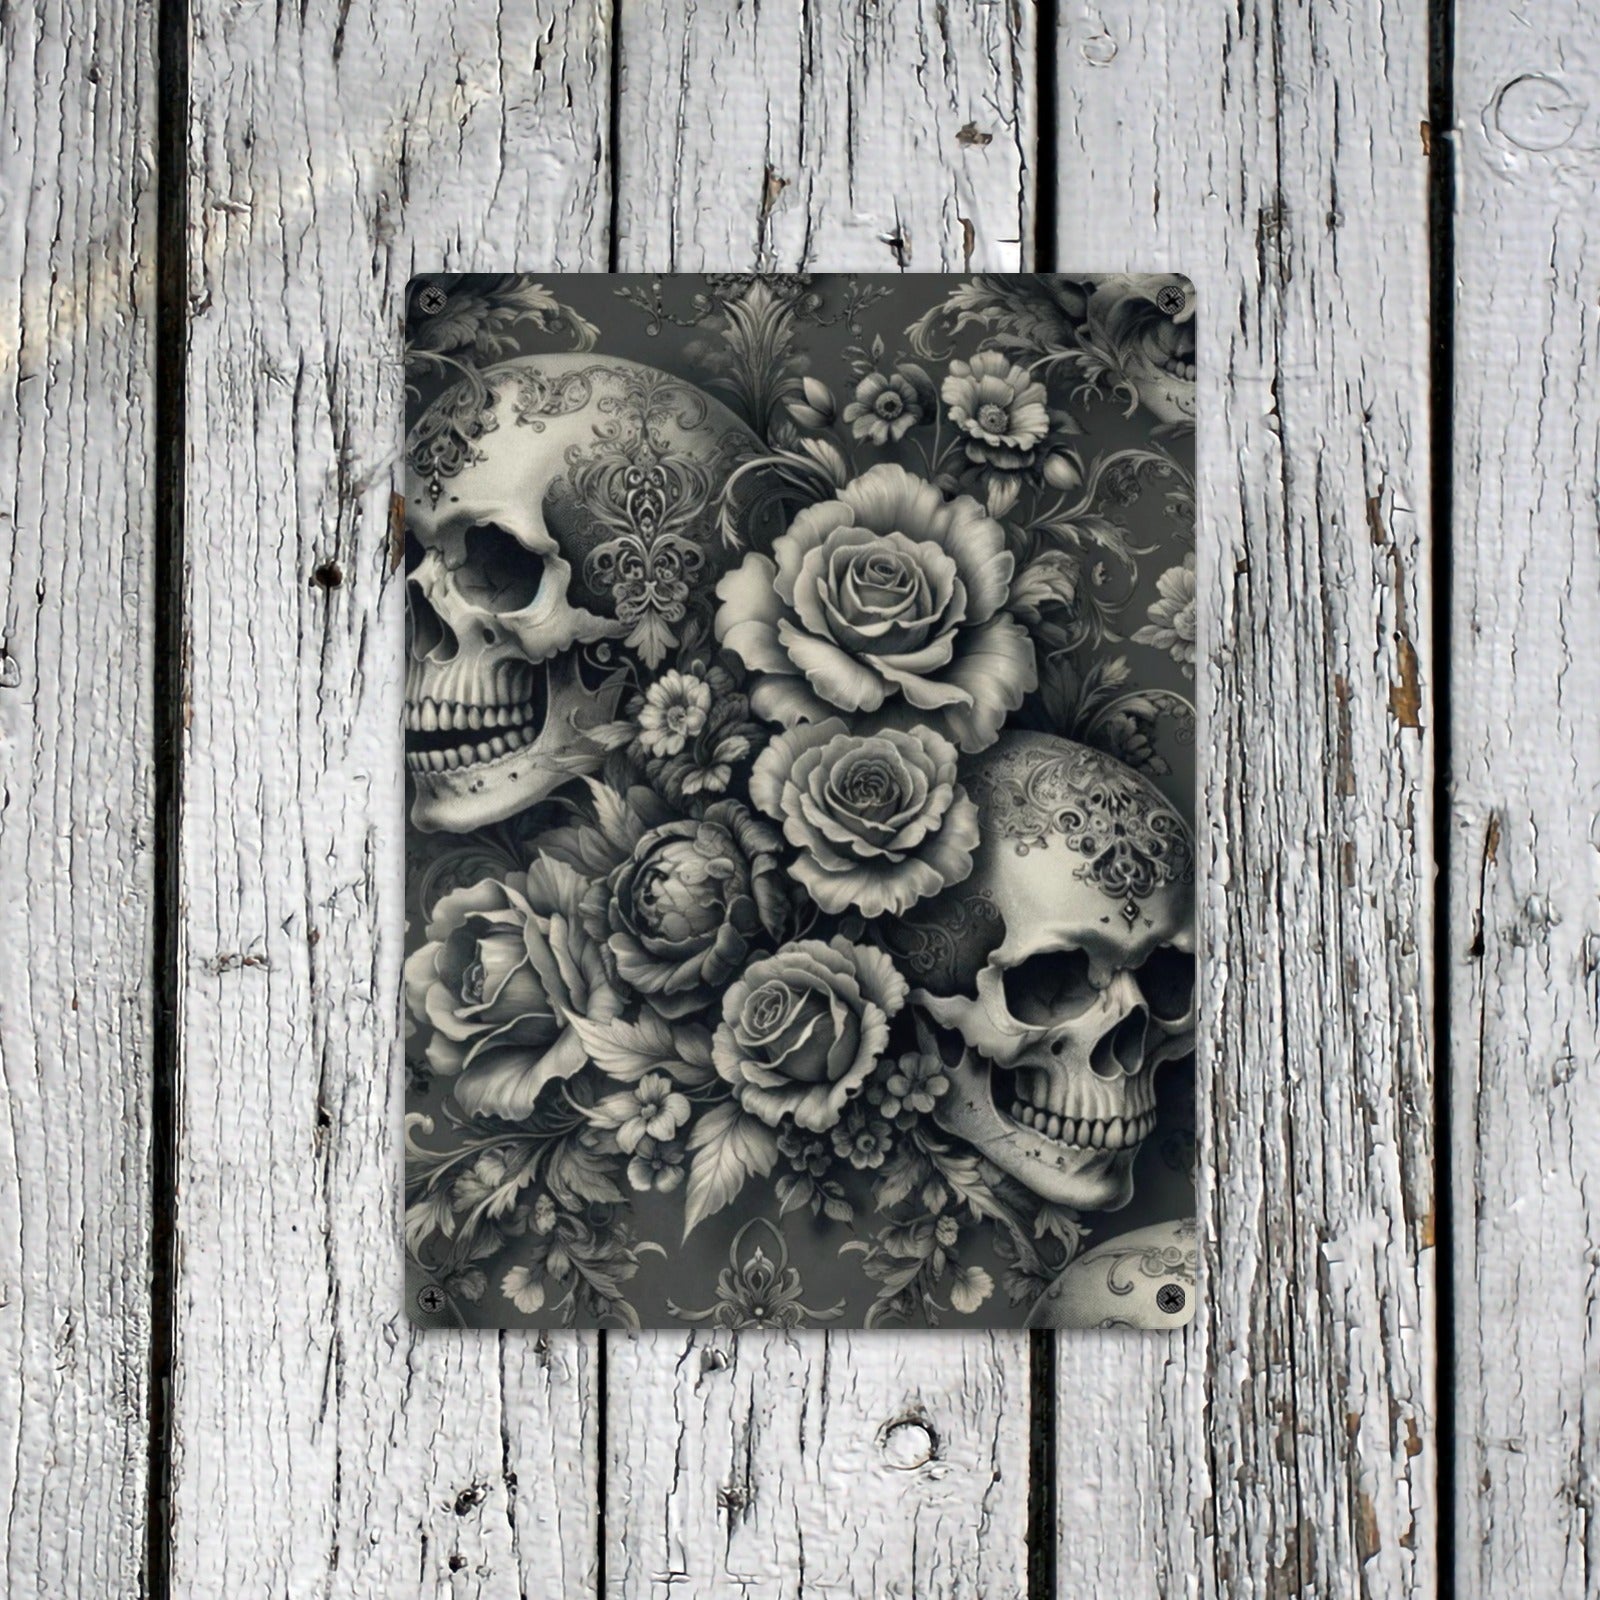 Gray Floral Skull Gothic Home Decor Wall Art Poster Rose Skull Sign Indoor / Outdoor Metal Tin Sign 12"x16"